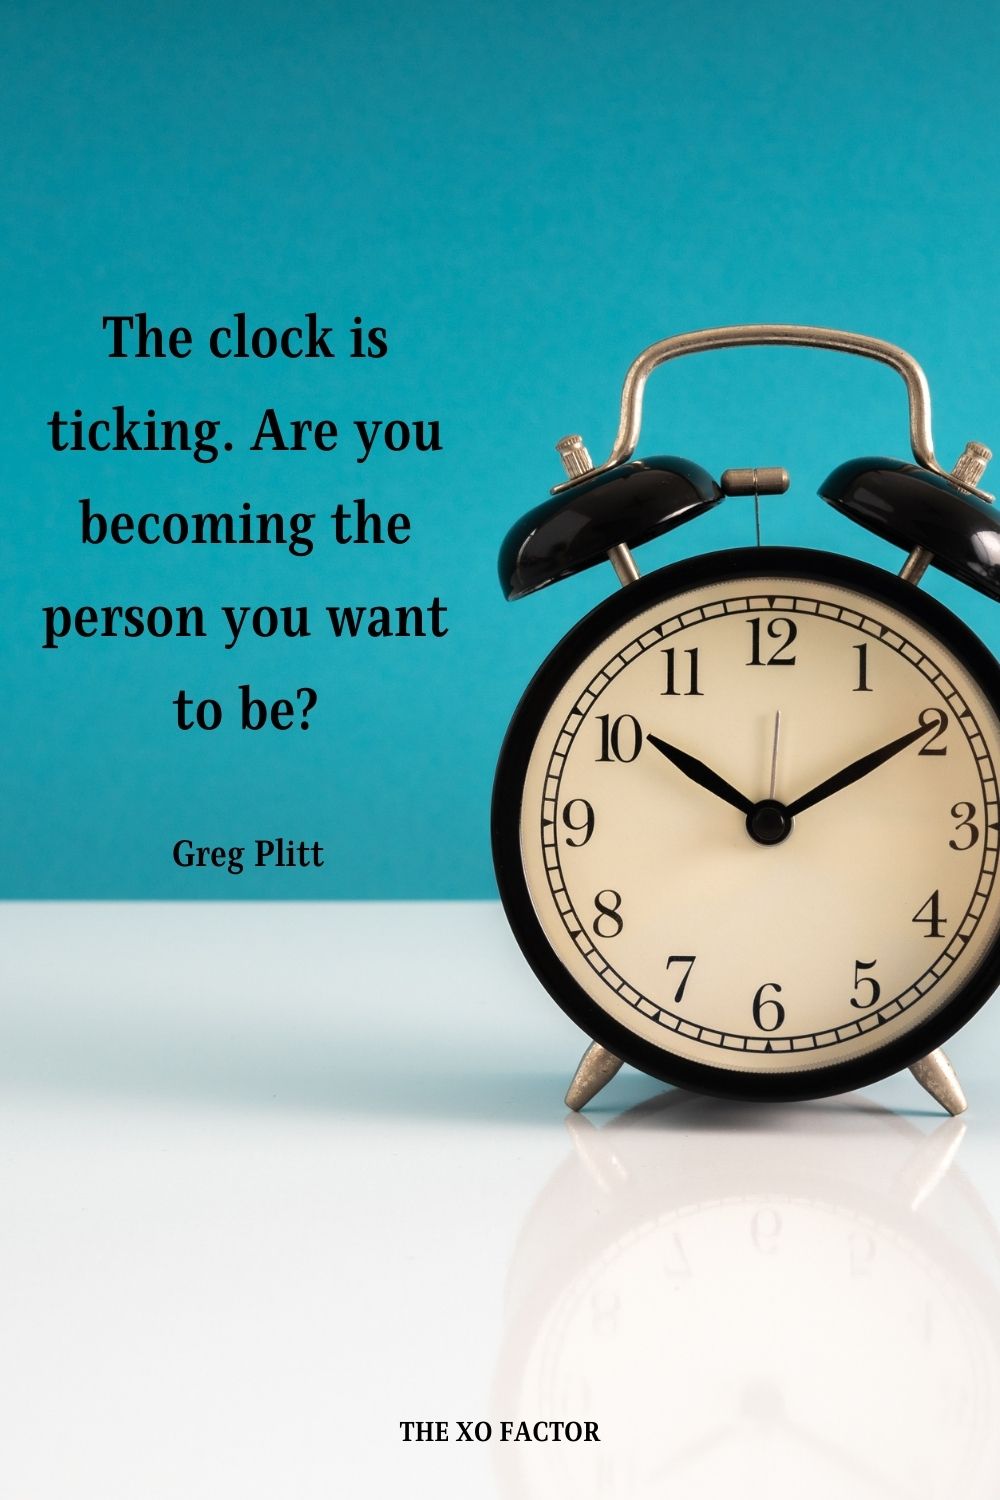 The clock is ticking. Are you becoming the person you want to be? Greg Plitt